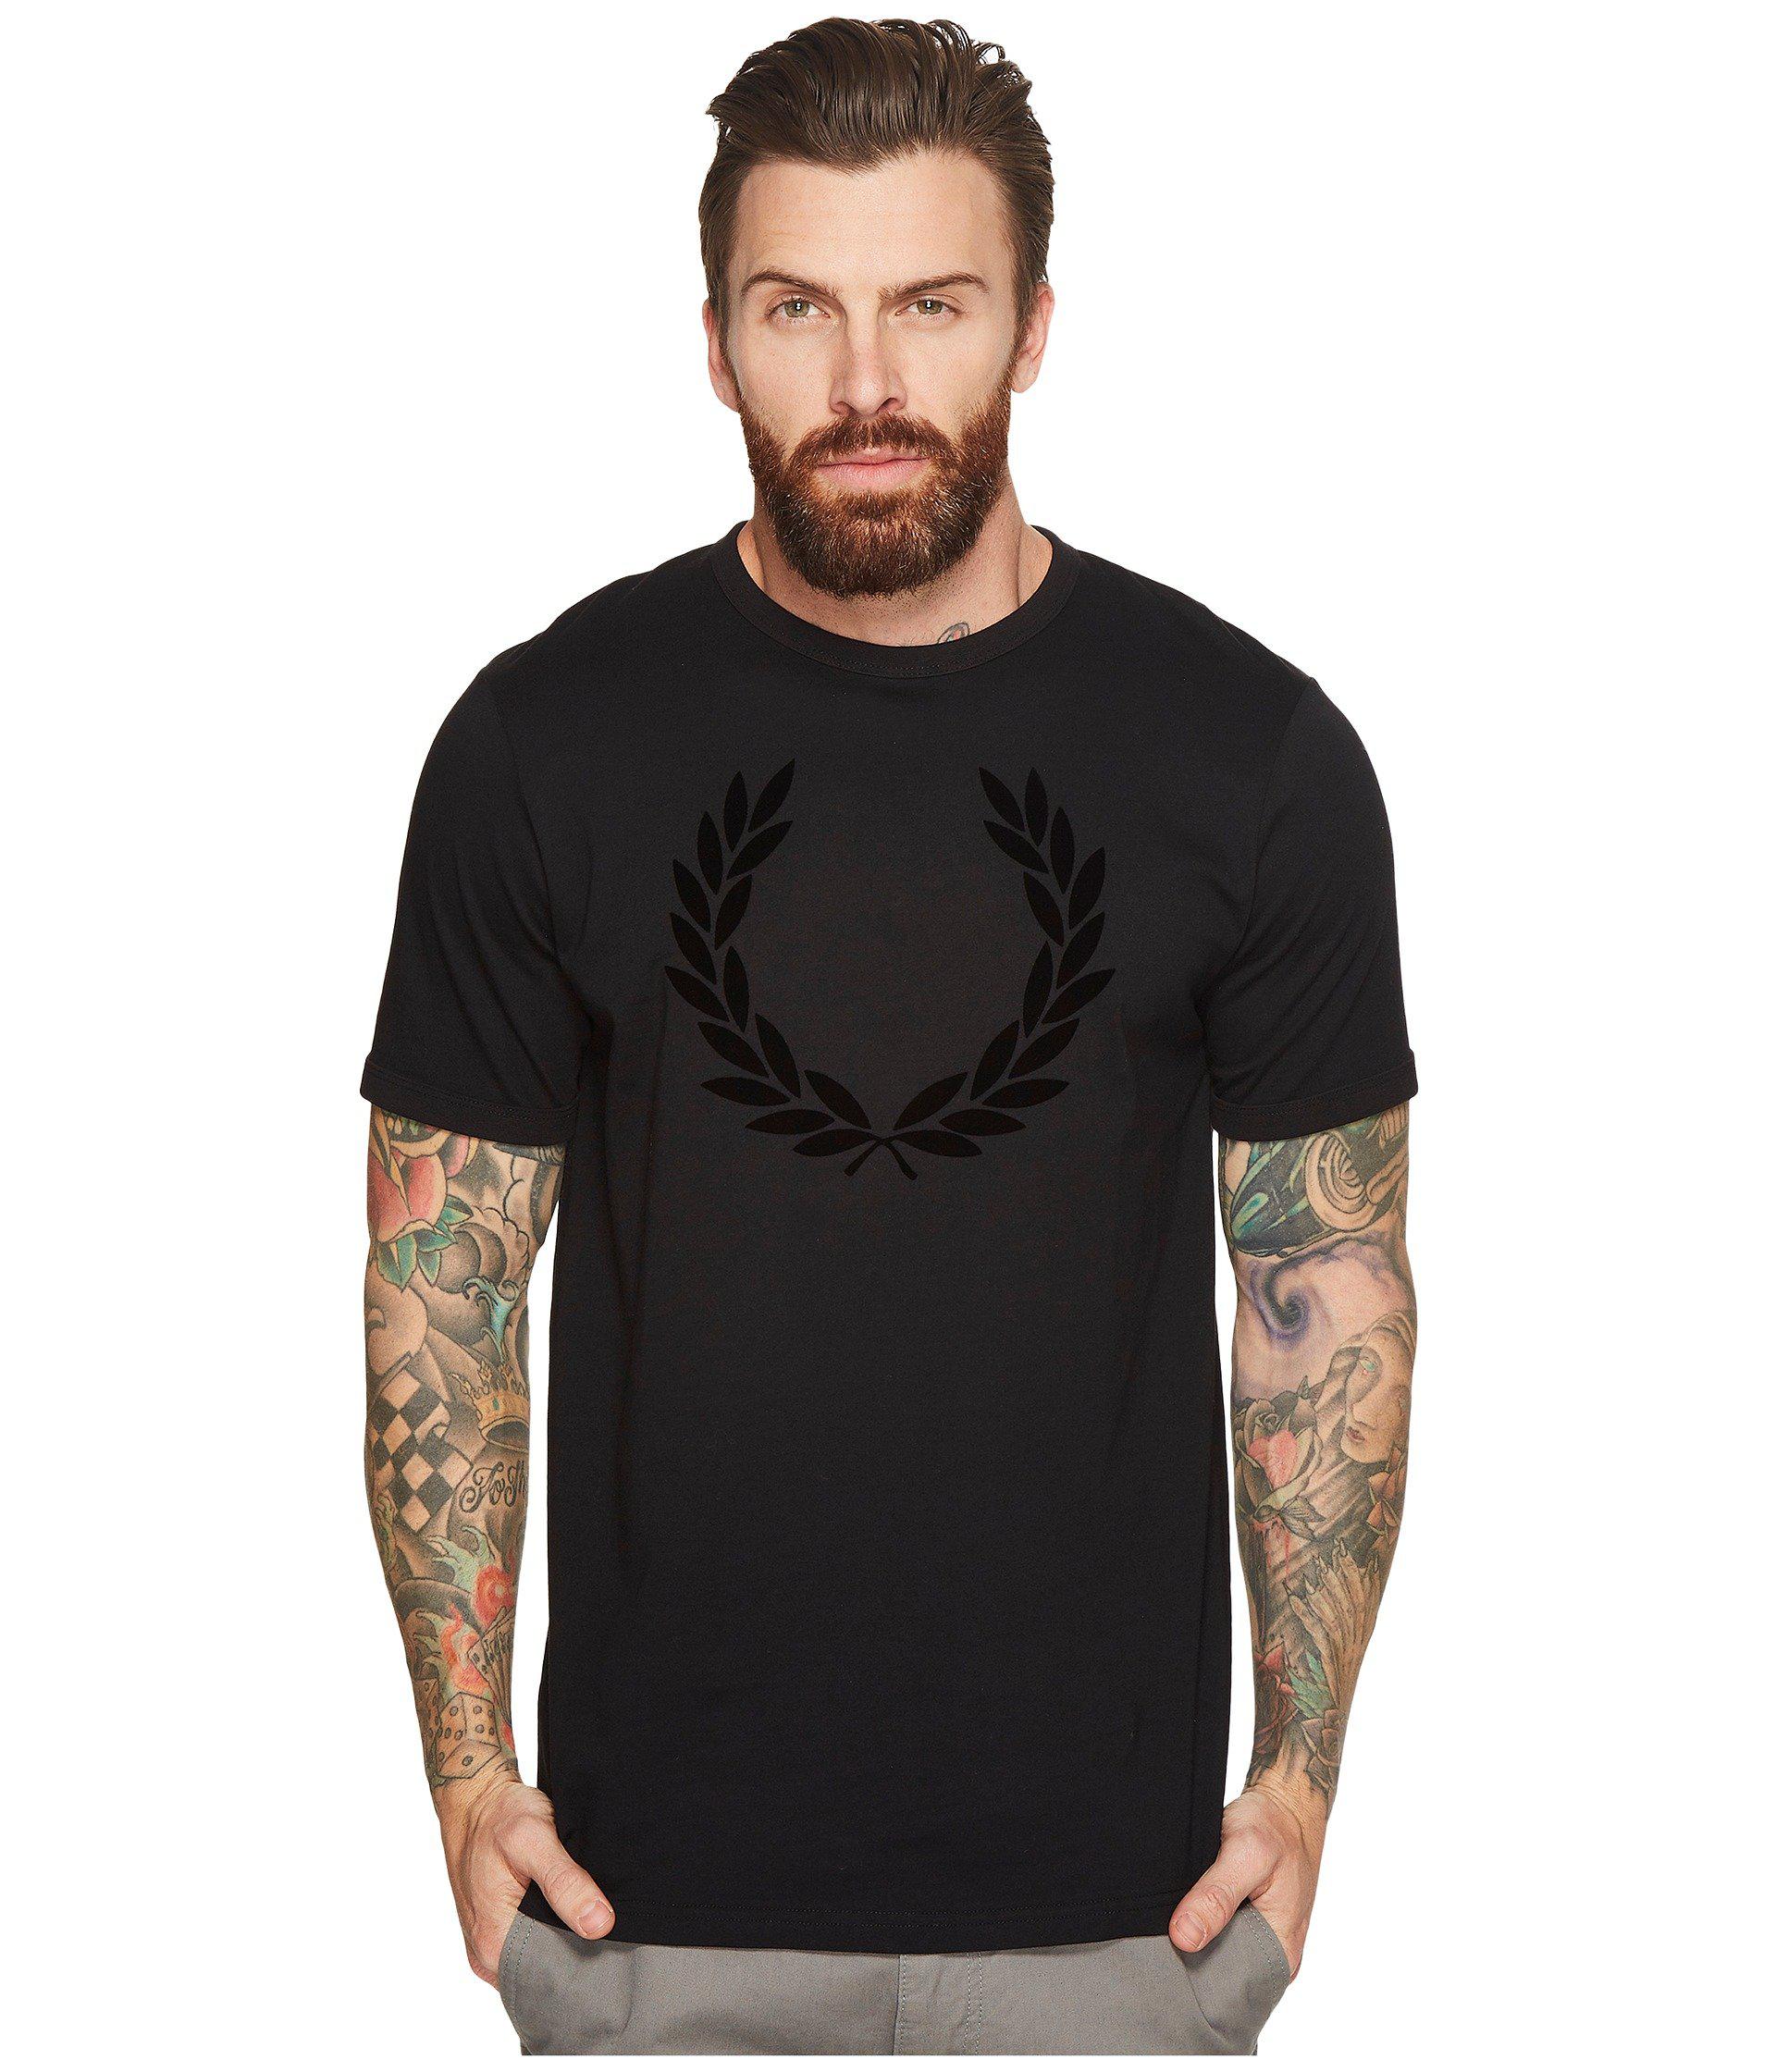 Fred Perry Cotton Textured Laurel Wreath T-shirt in Black for Men - Lyst